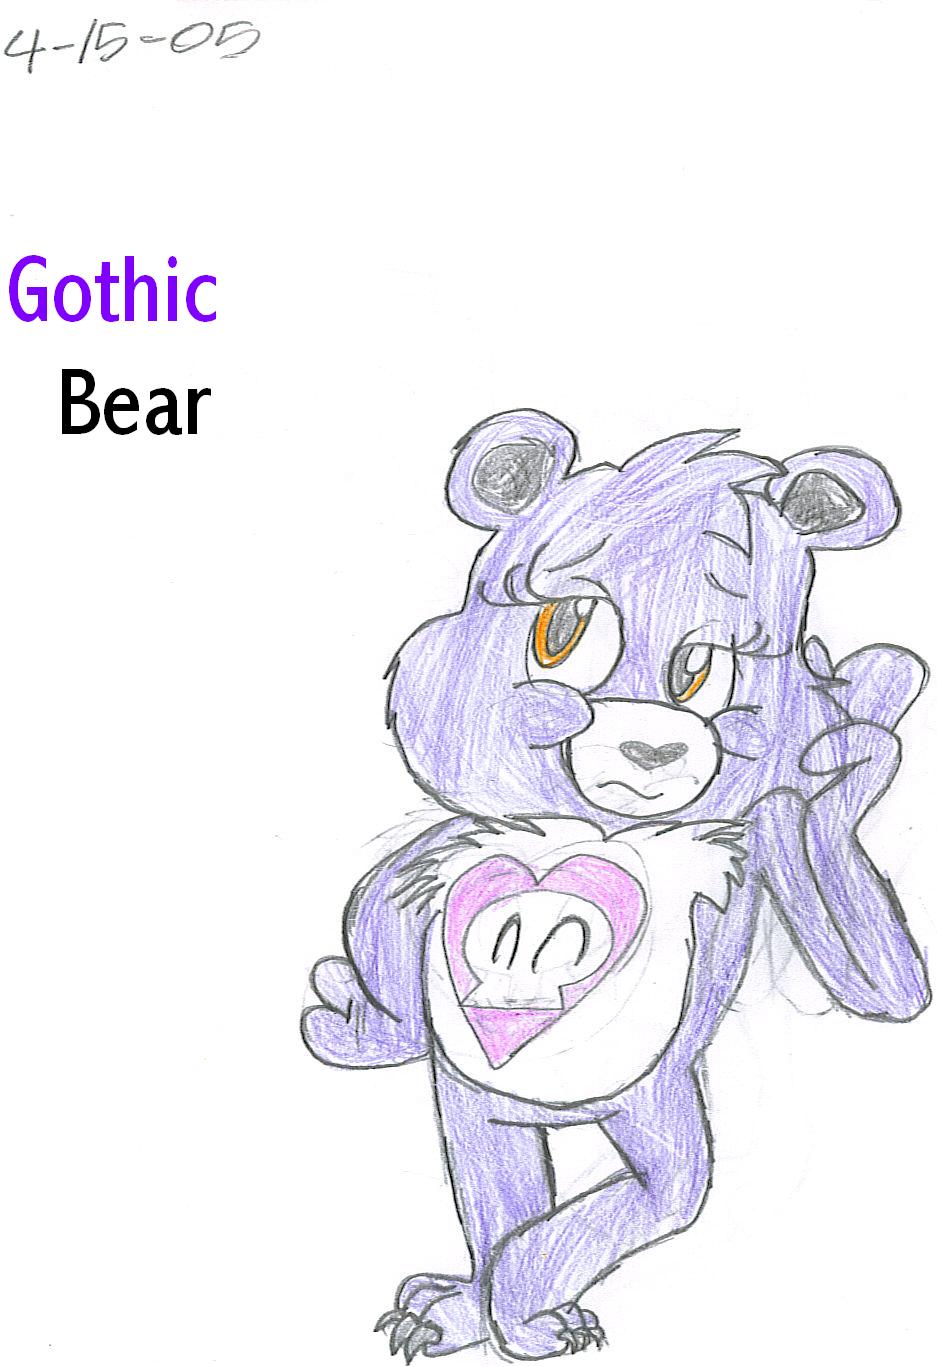 Gothic Bear by Artie_Drawings